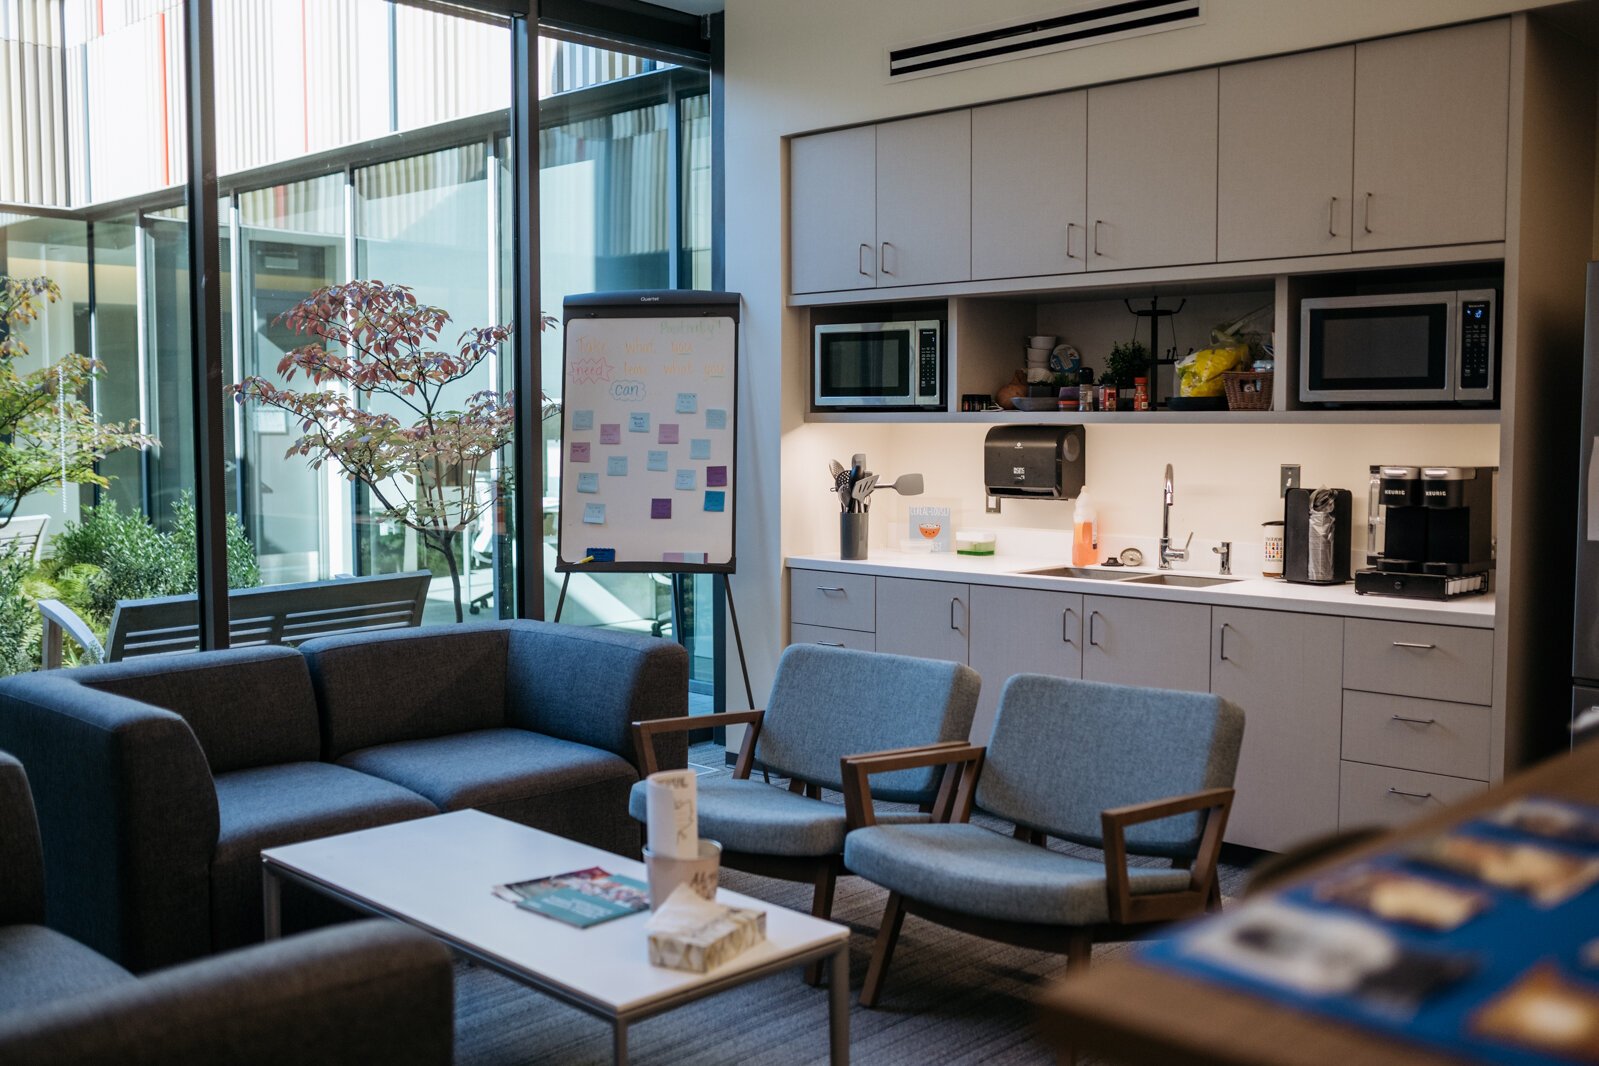 The staff wellness lounge sports healthy snacks, coffee, yoga on TV, and space for eating, relaxing, or finishing a project. The adjacent atrium encourages health and wellness among teachers.